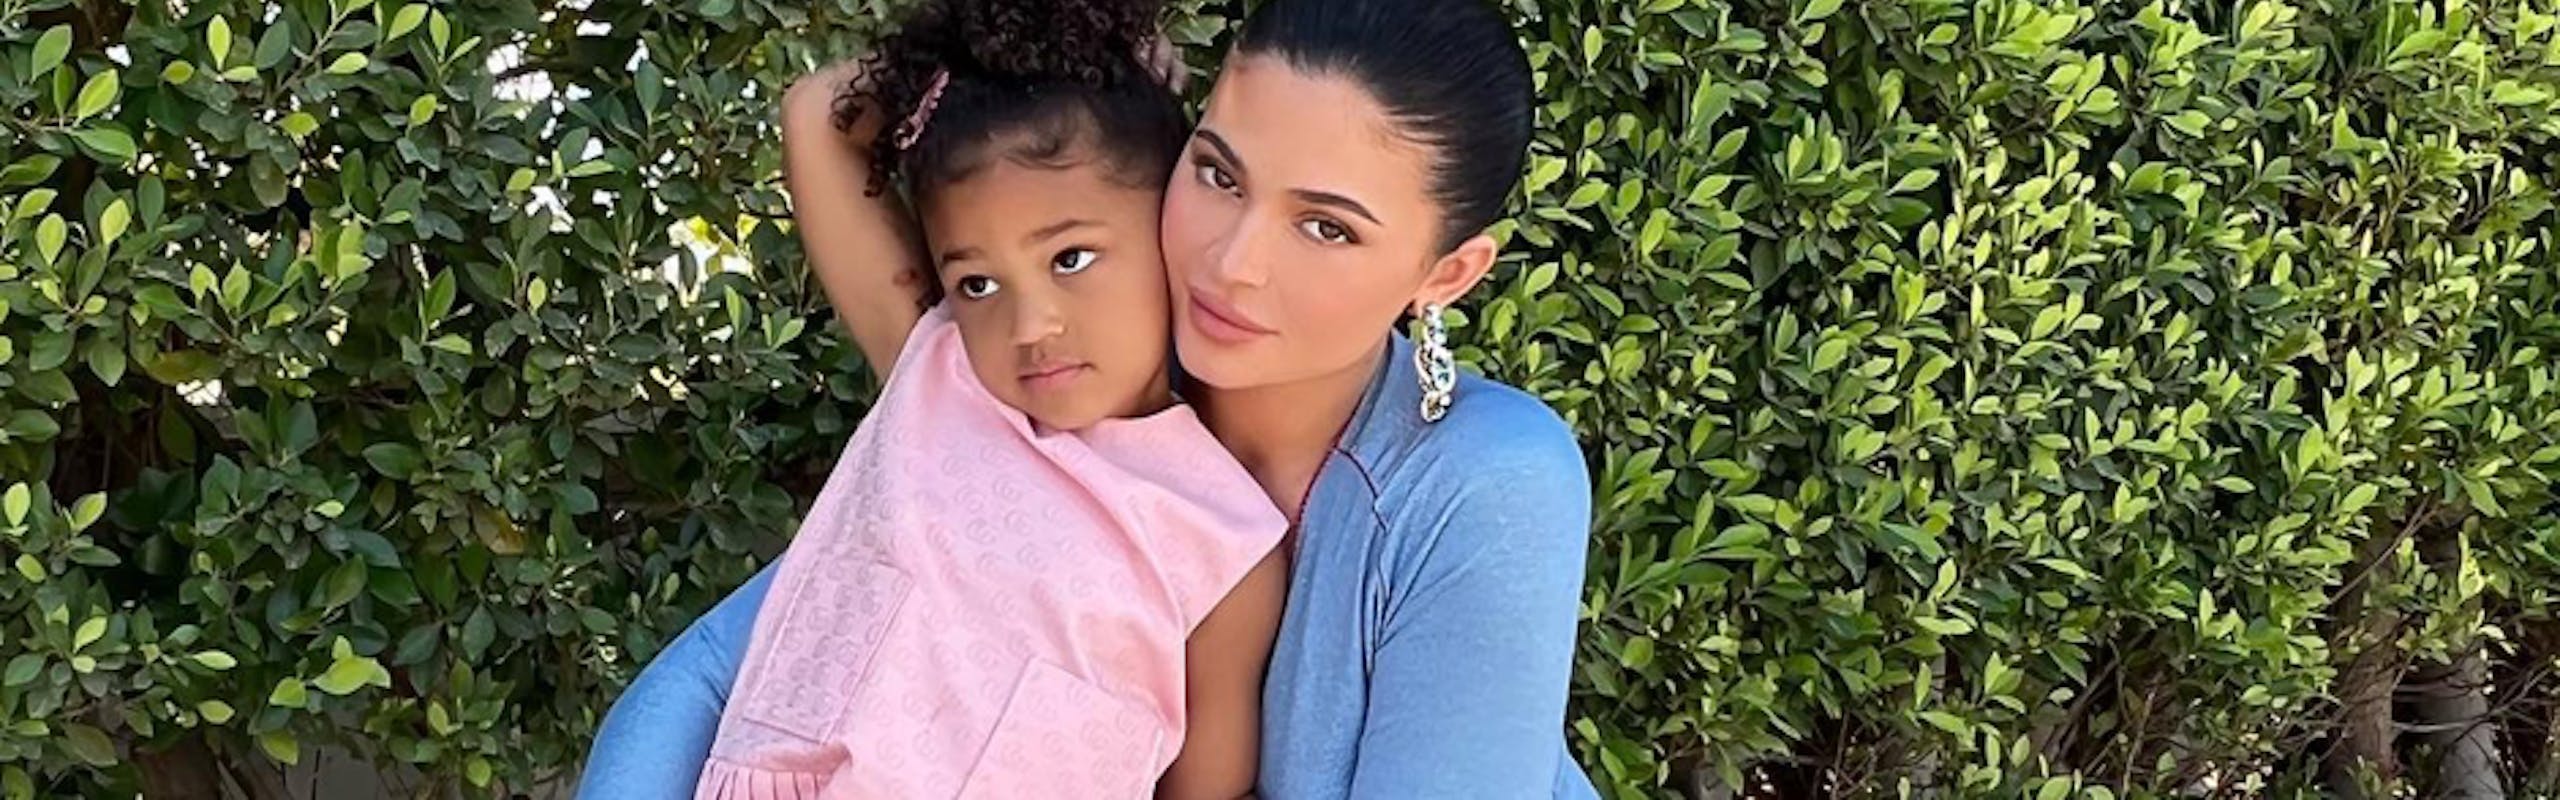 Kylie Jenner wears baby blue maxi dress while posing with daughter Stormi, who wears a pink Gucci dress